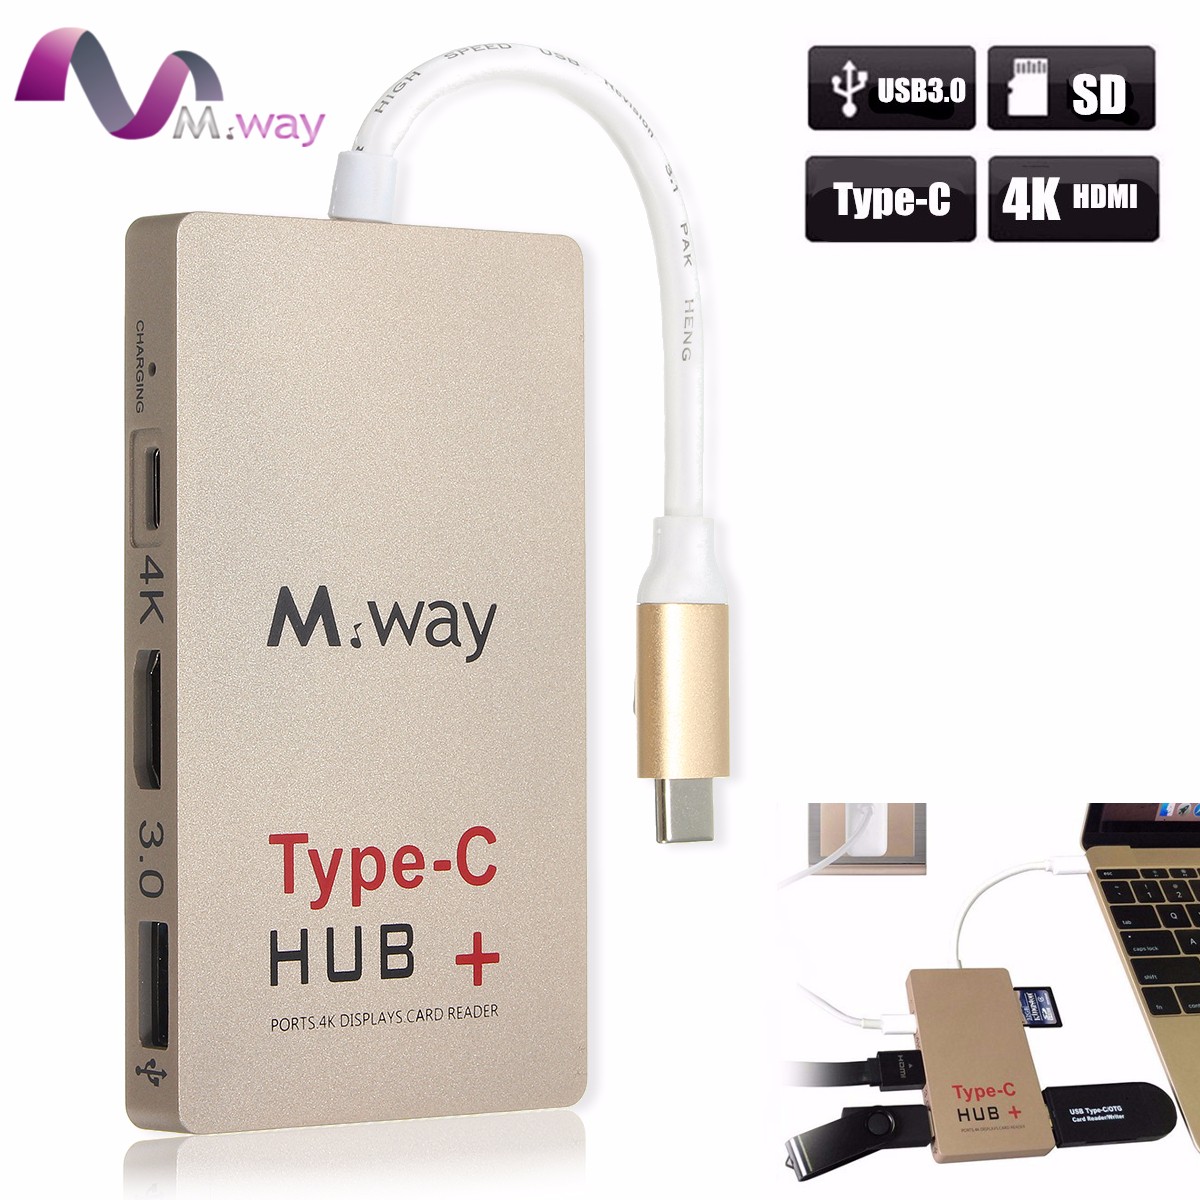 M.Way USB 3.1 Type-C to 4k HDMI USB 3.0 HUB USB-C Charger SD Card Reader Adapter